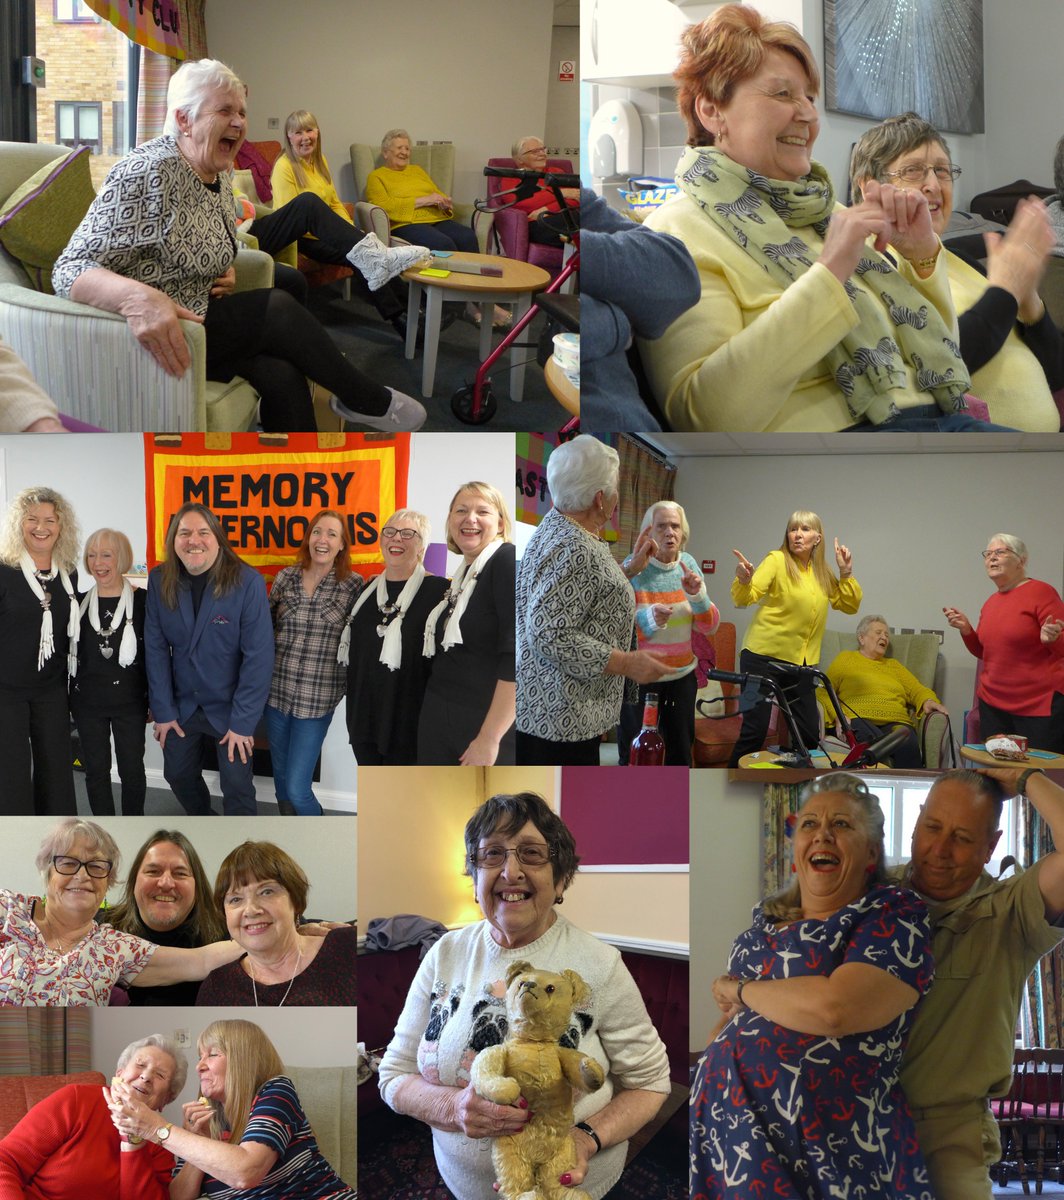 #MemoryAfternoons Where the happiness is @TNLComFund @Snippetcuts @JeanetteLark @Antonioroberto1 @ColBoroughHomes @ColchesterArts #PeoplesProjects #Creatingnewmemories